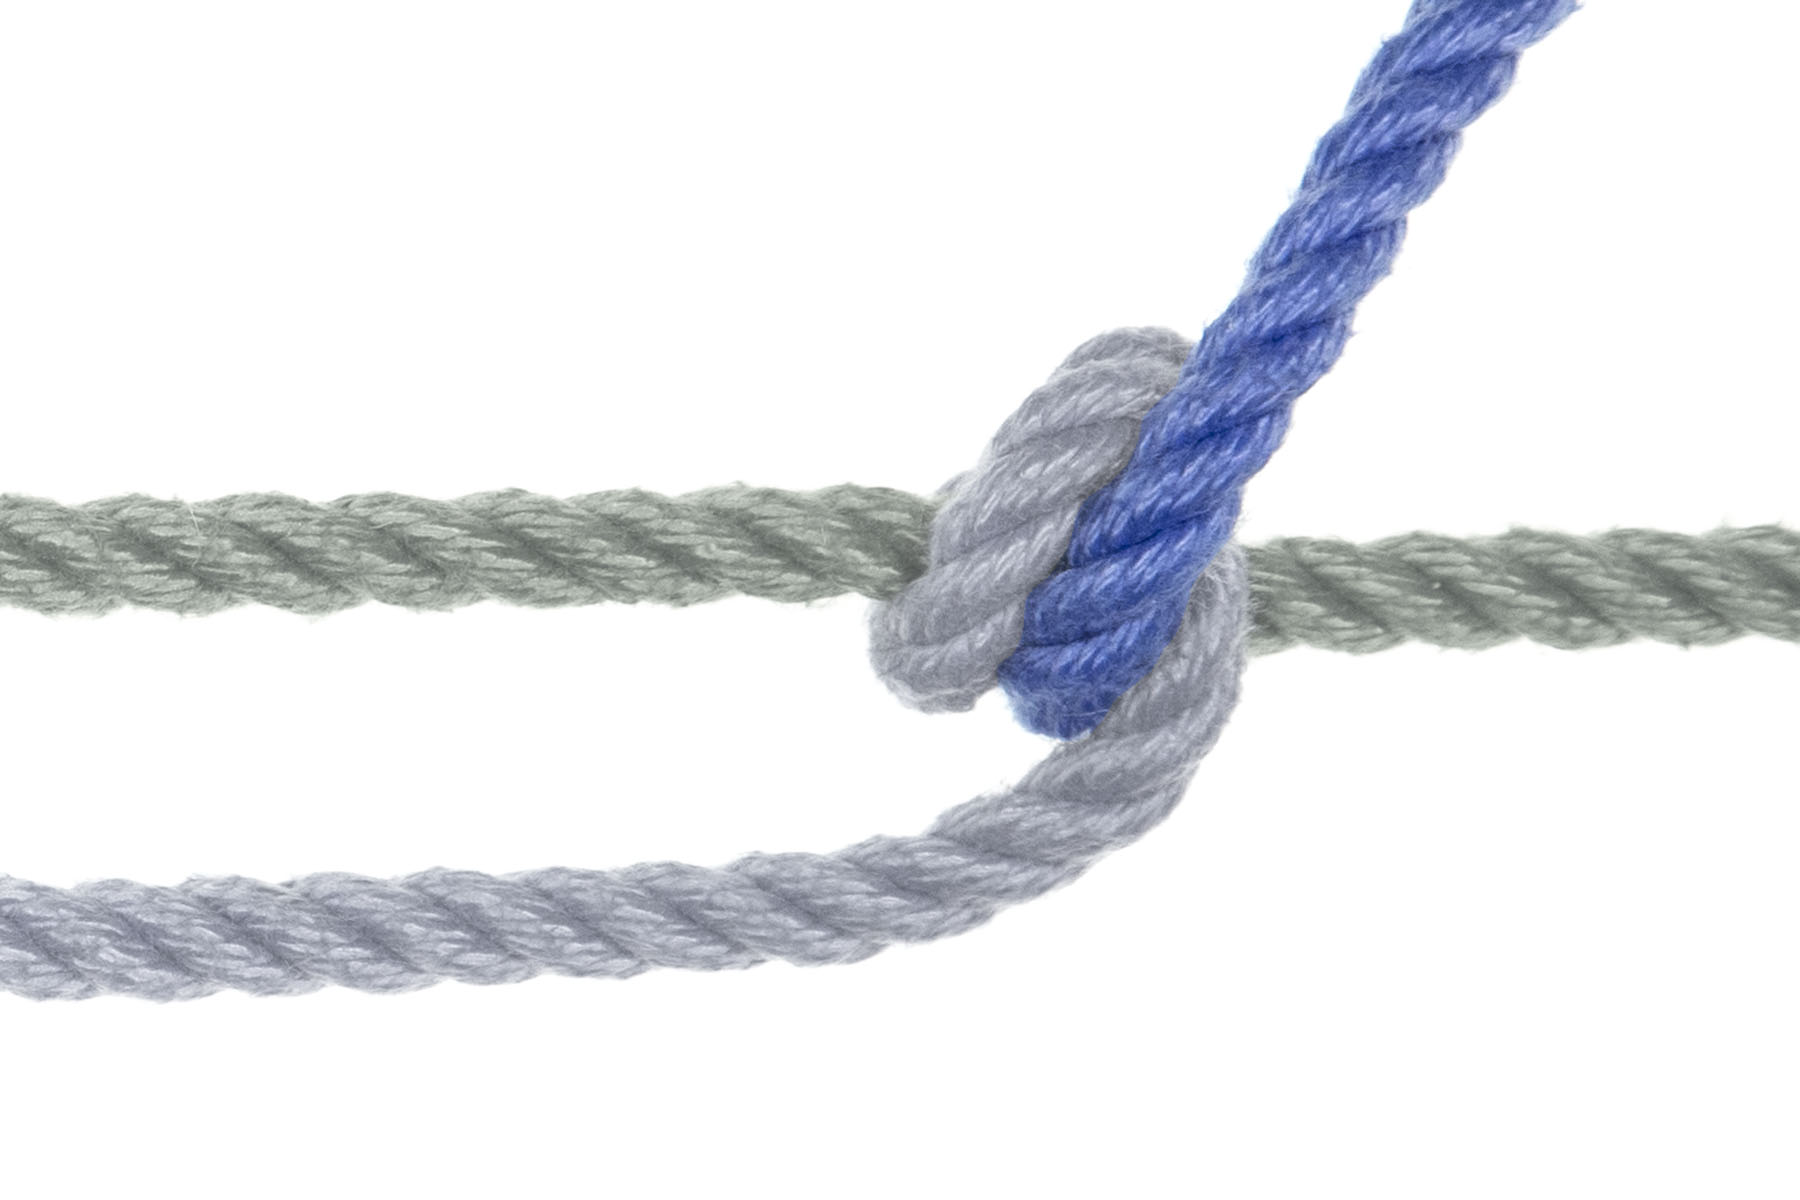 The blue rope goes around the green rope again, passing under it and then over it, making a new spiral. This spiral is wedged between the standing part of the rope and the first spiral. The first spiral is to the left of the second spiral and the standing part is to the right. The end of the rope is again pulled up and to the right.